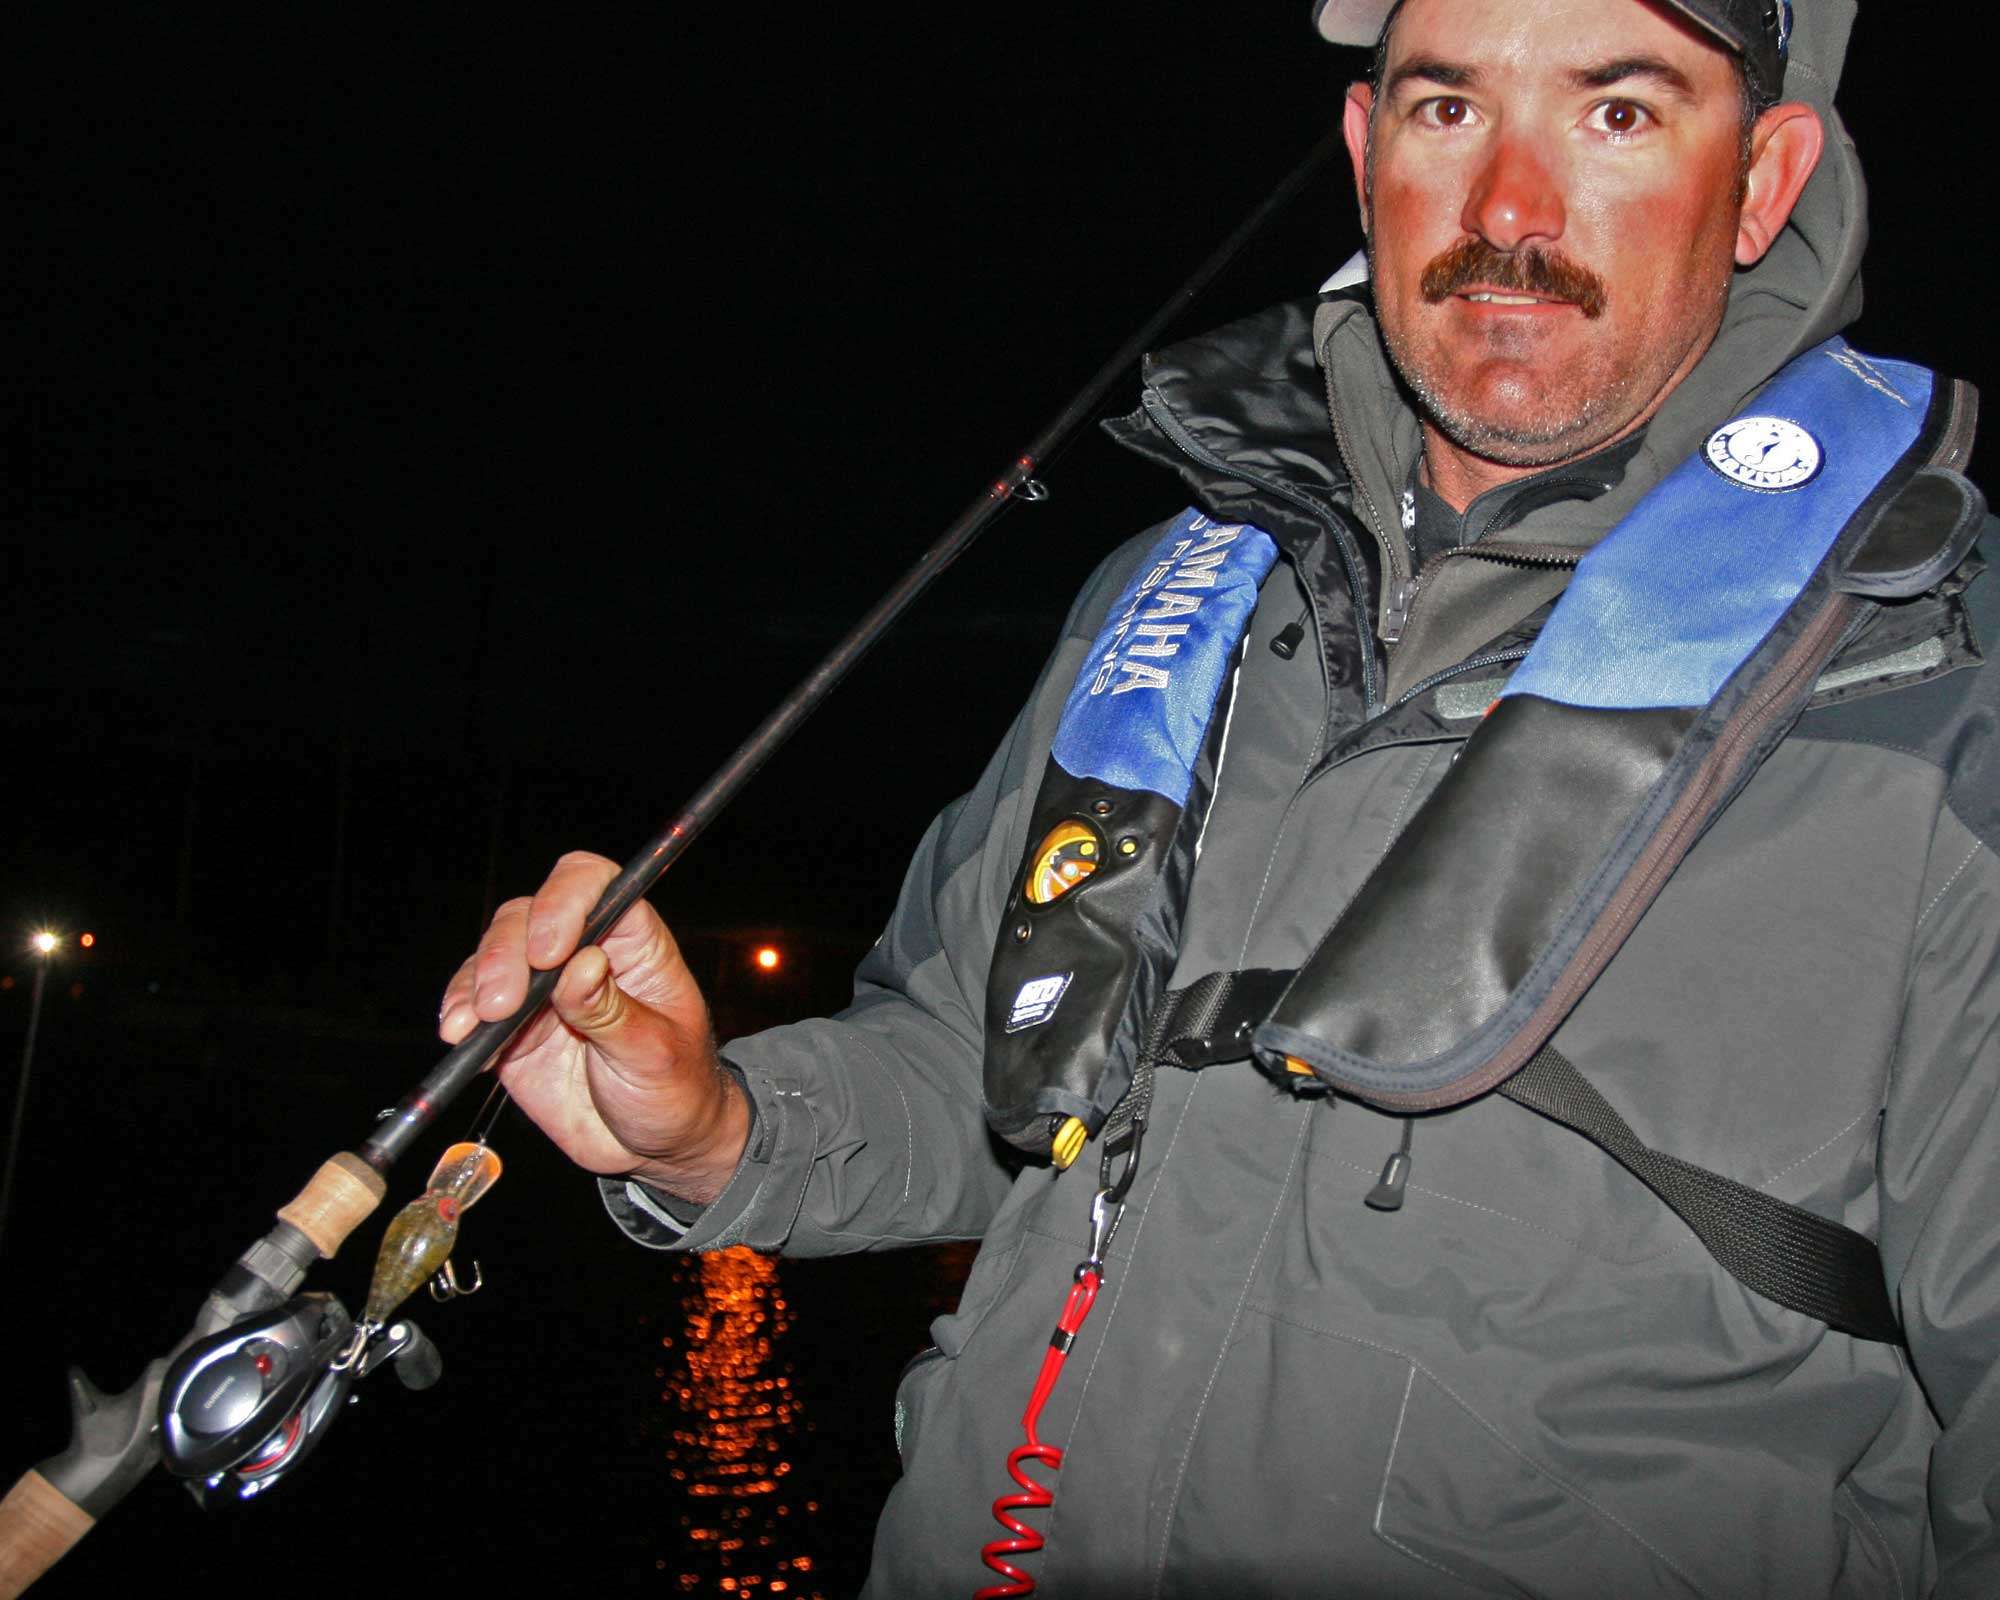 Jared Lintner predominantly used a Wiggle Wart and was fishing in less than 6 feet of water.